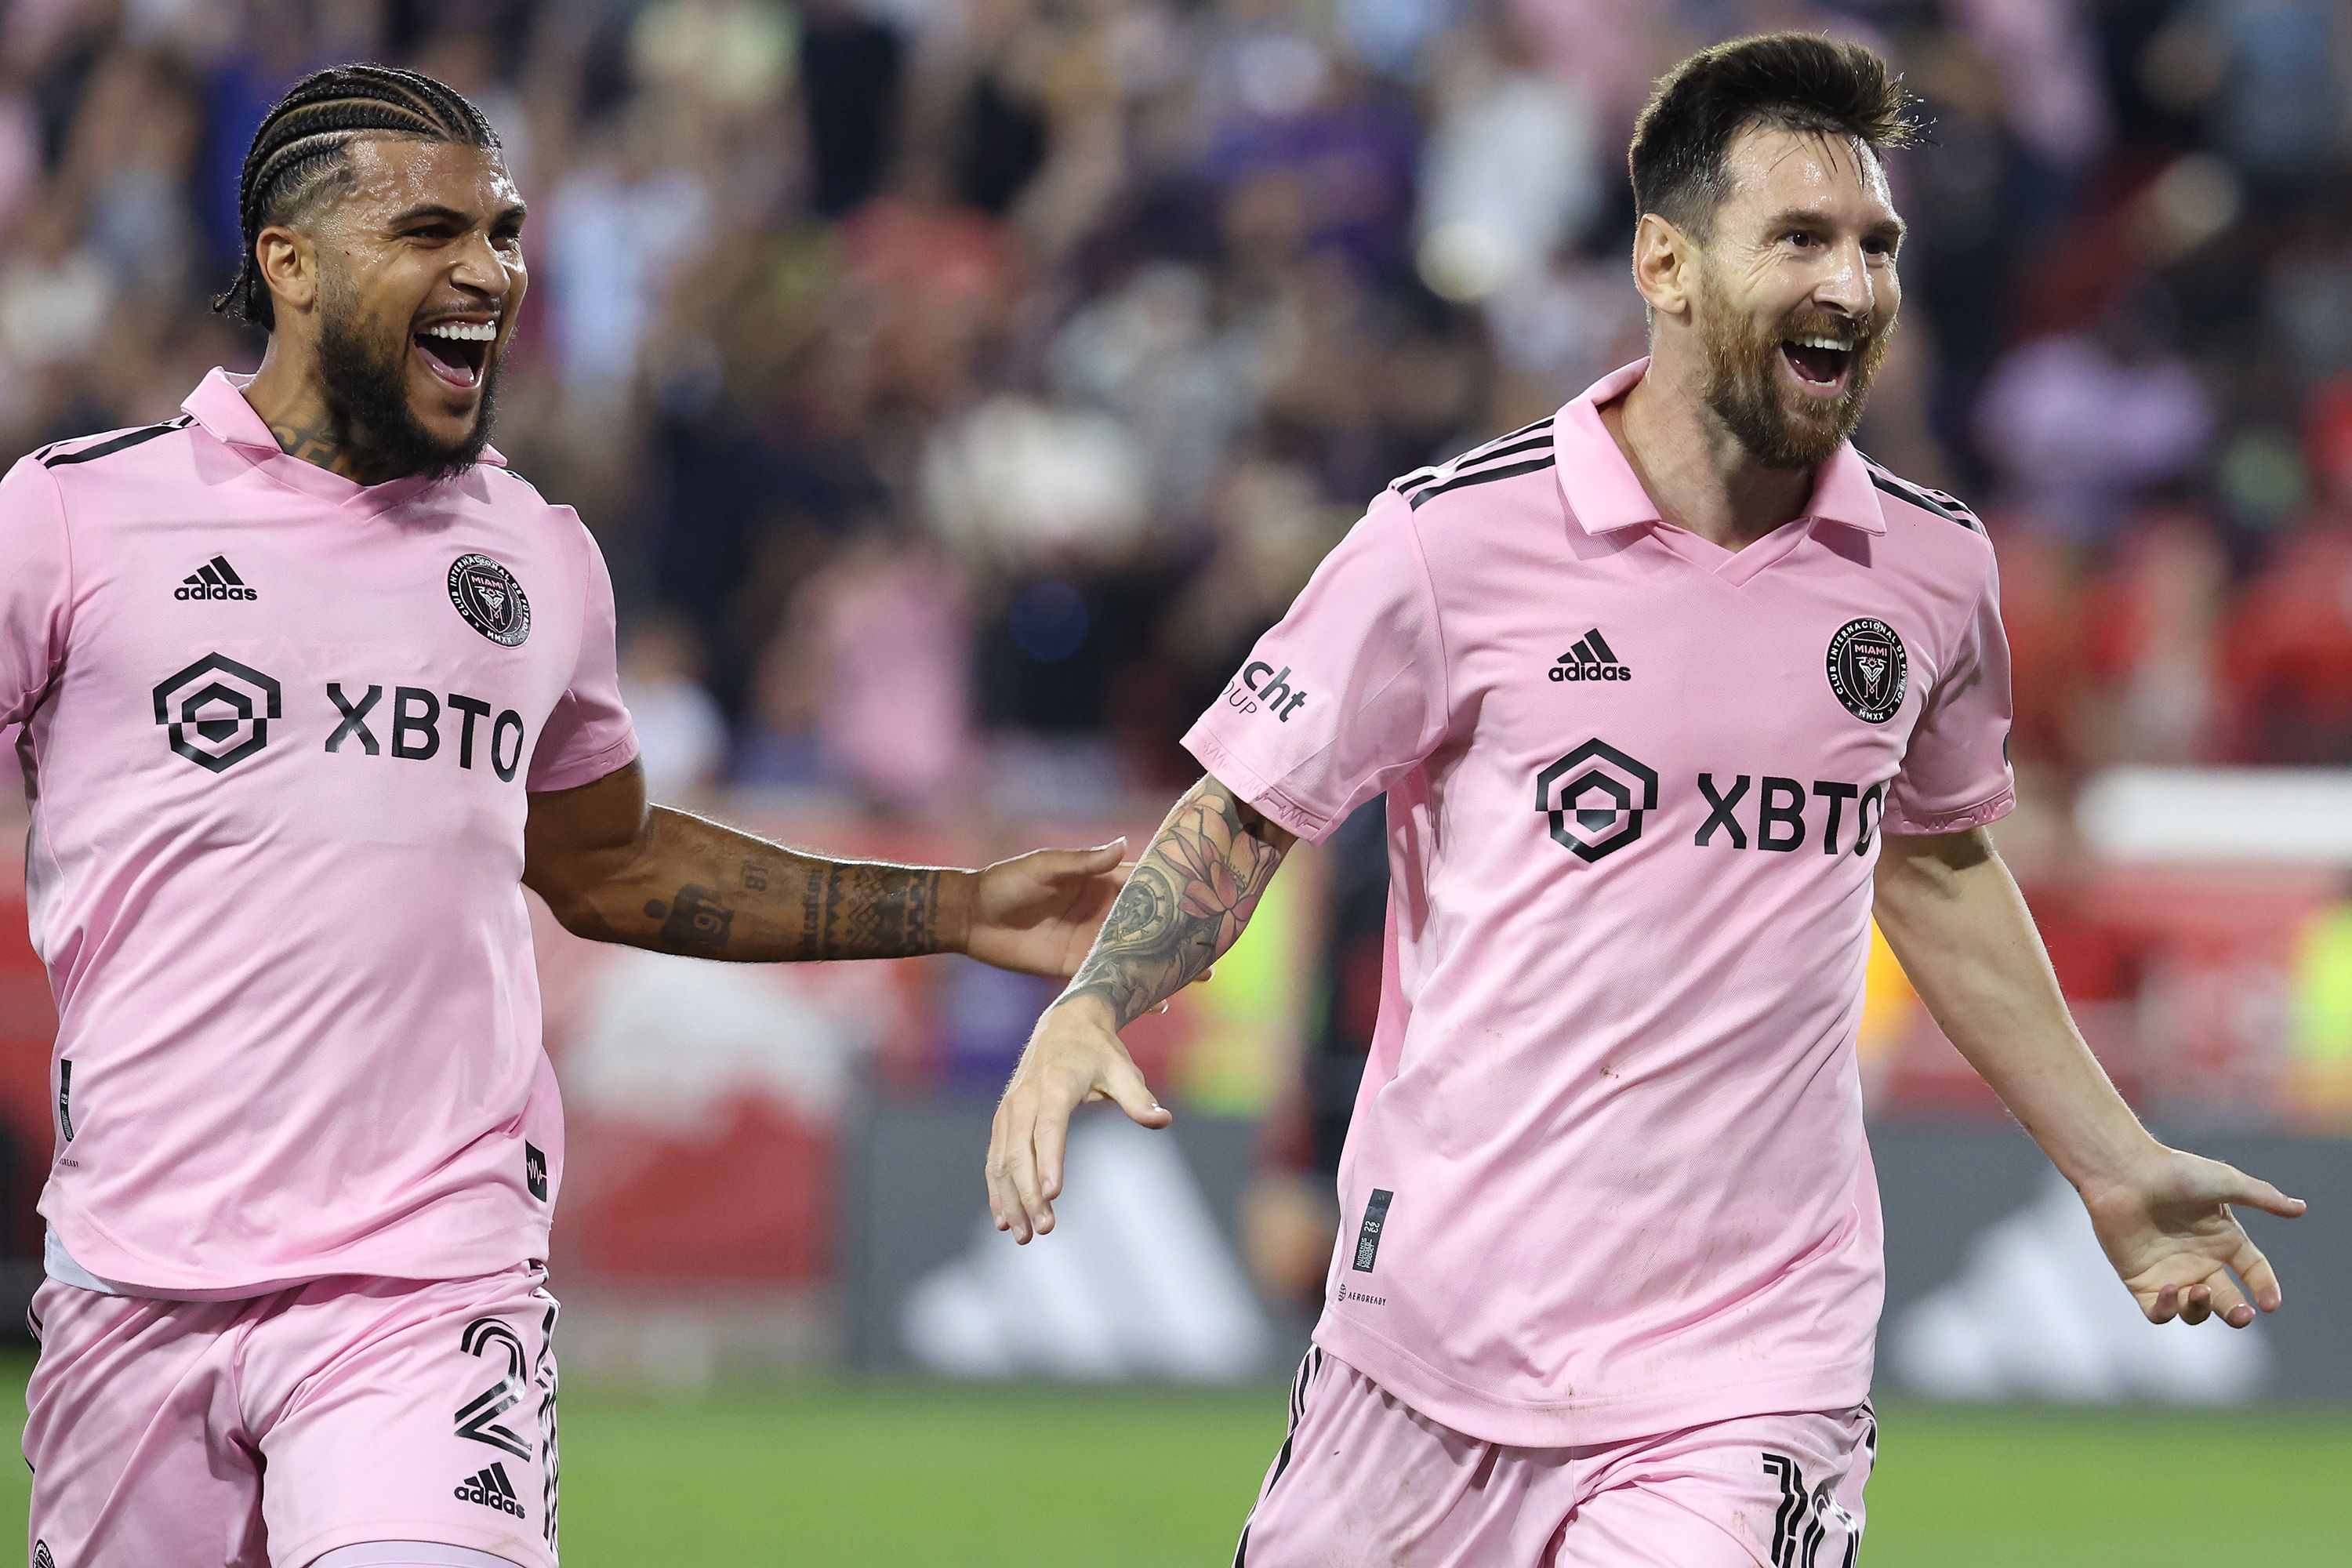 Lionel Messi makes MLS debut: How does the league work?, Football News